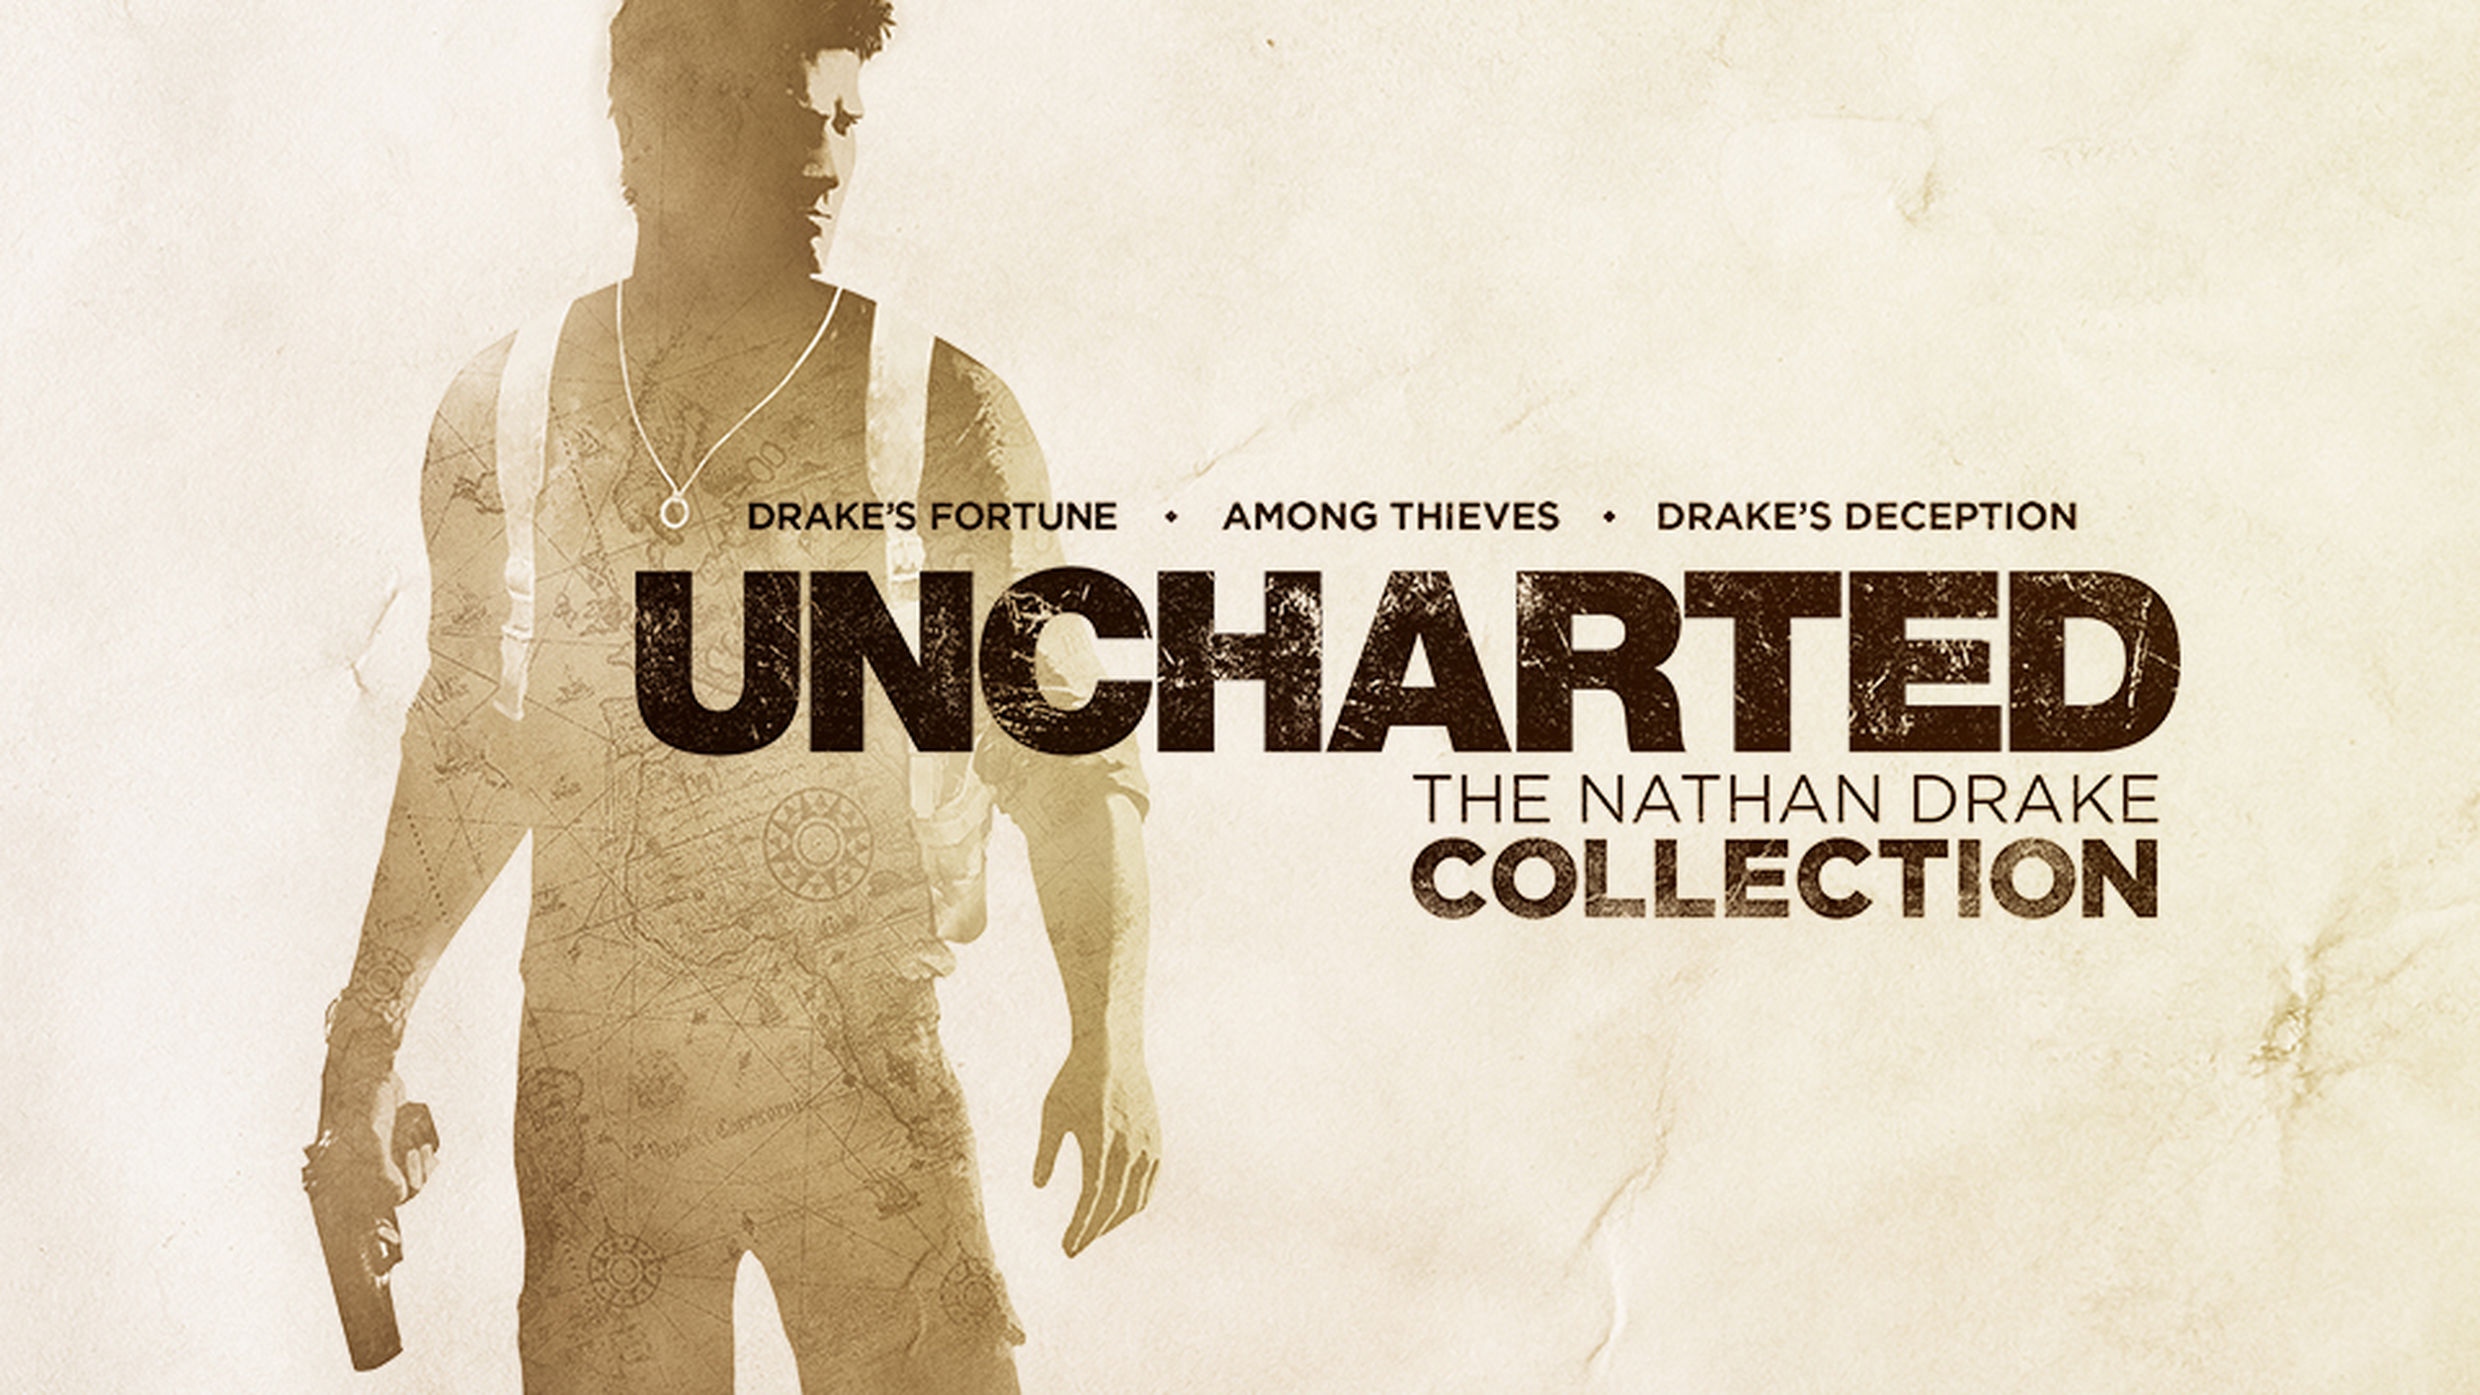 Uncharted collection купить. Uncharted collection ps4. Нейтан Дрейк. Uncharted Nathan Drake collection ps4.